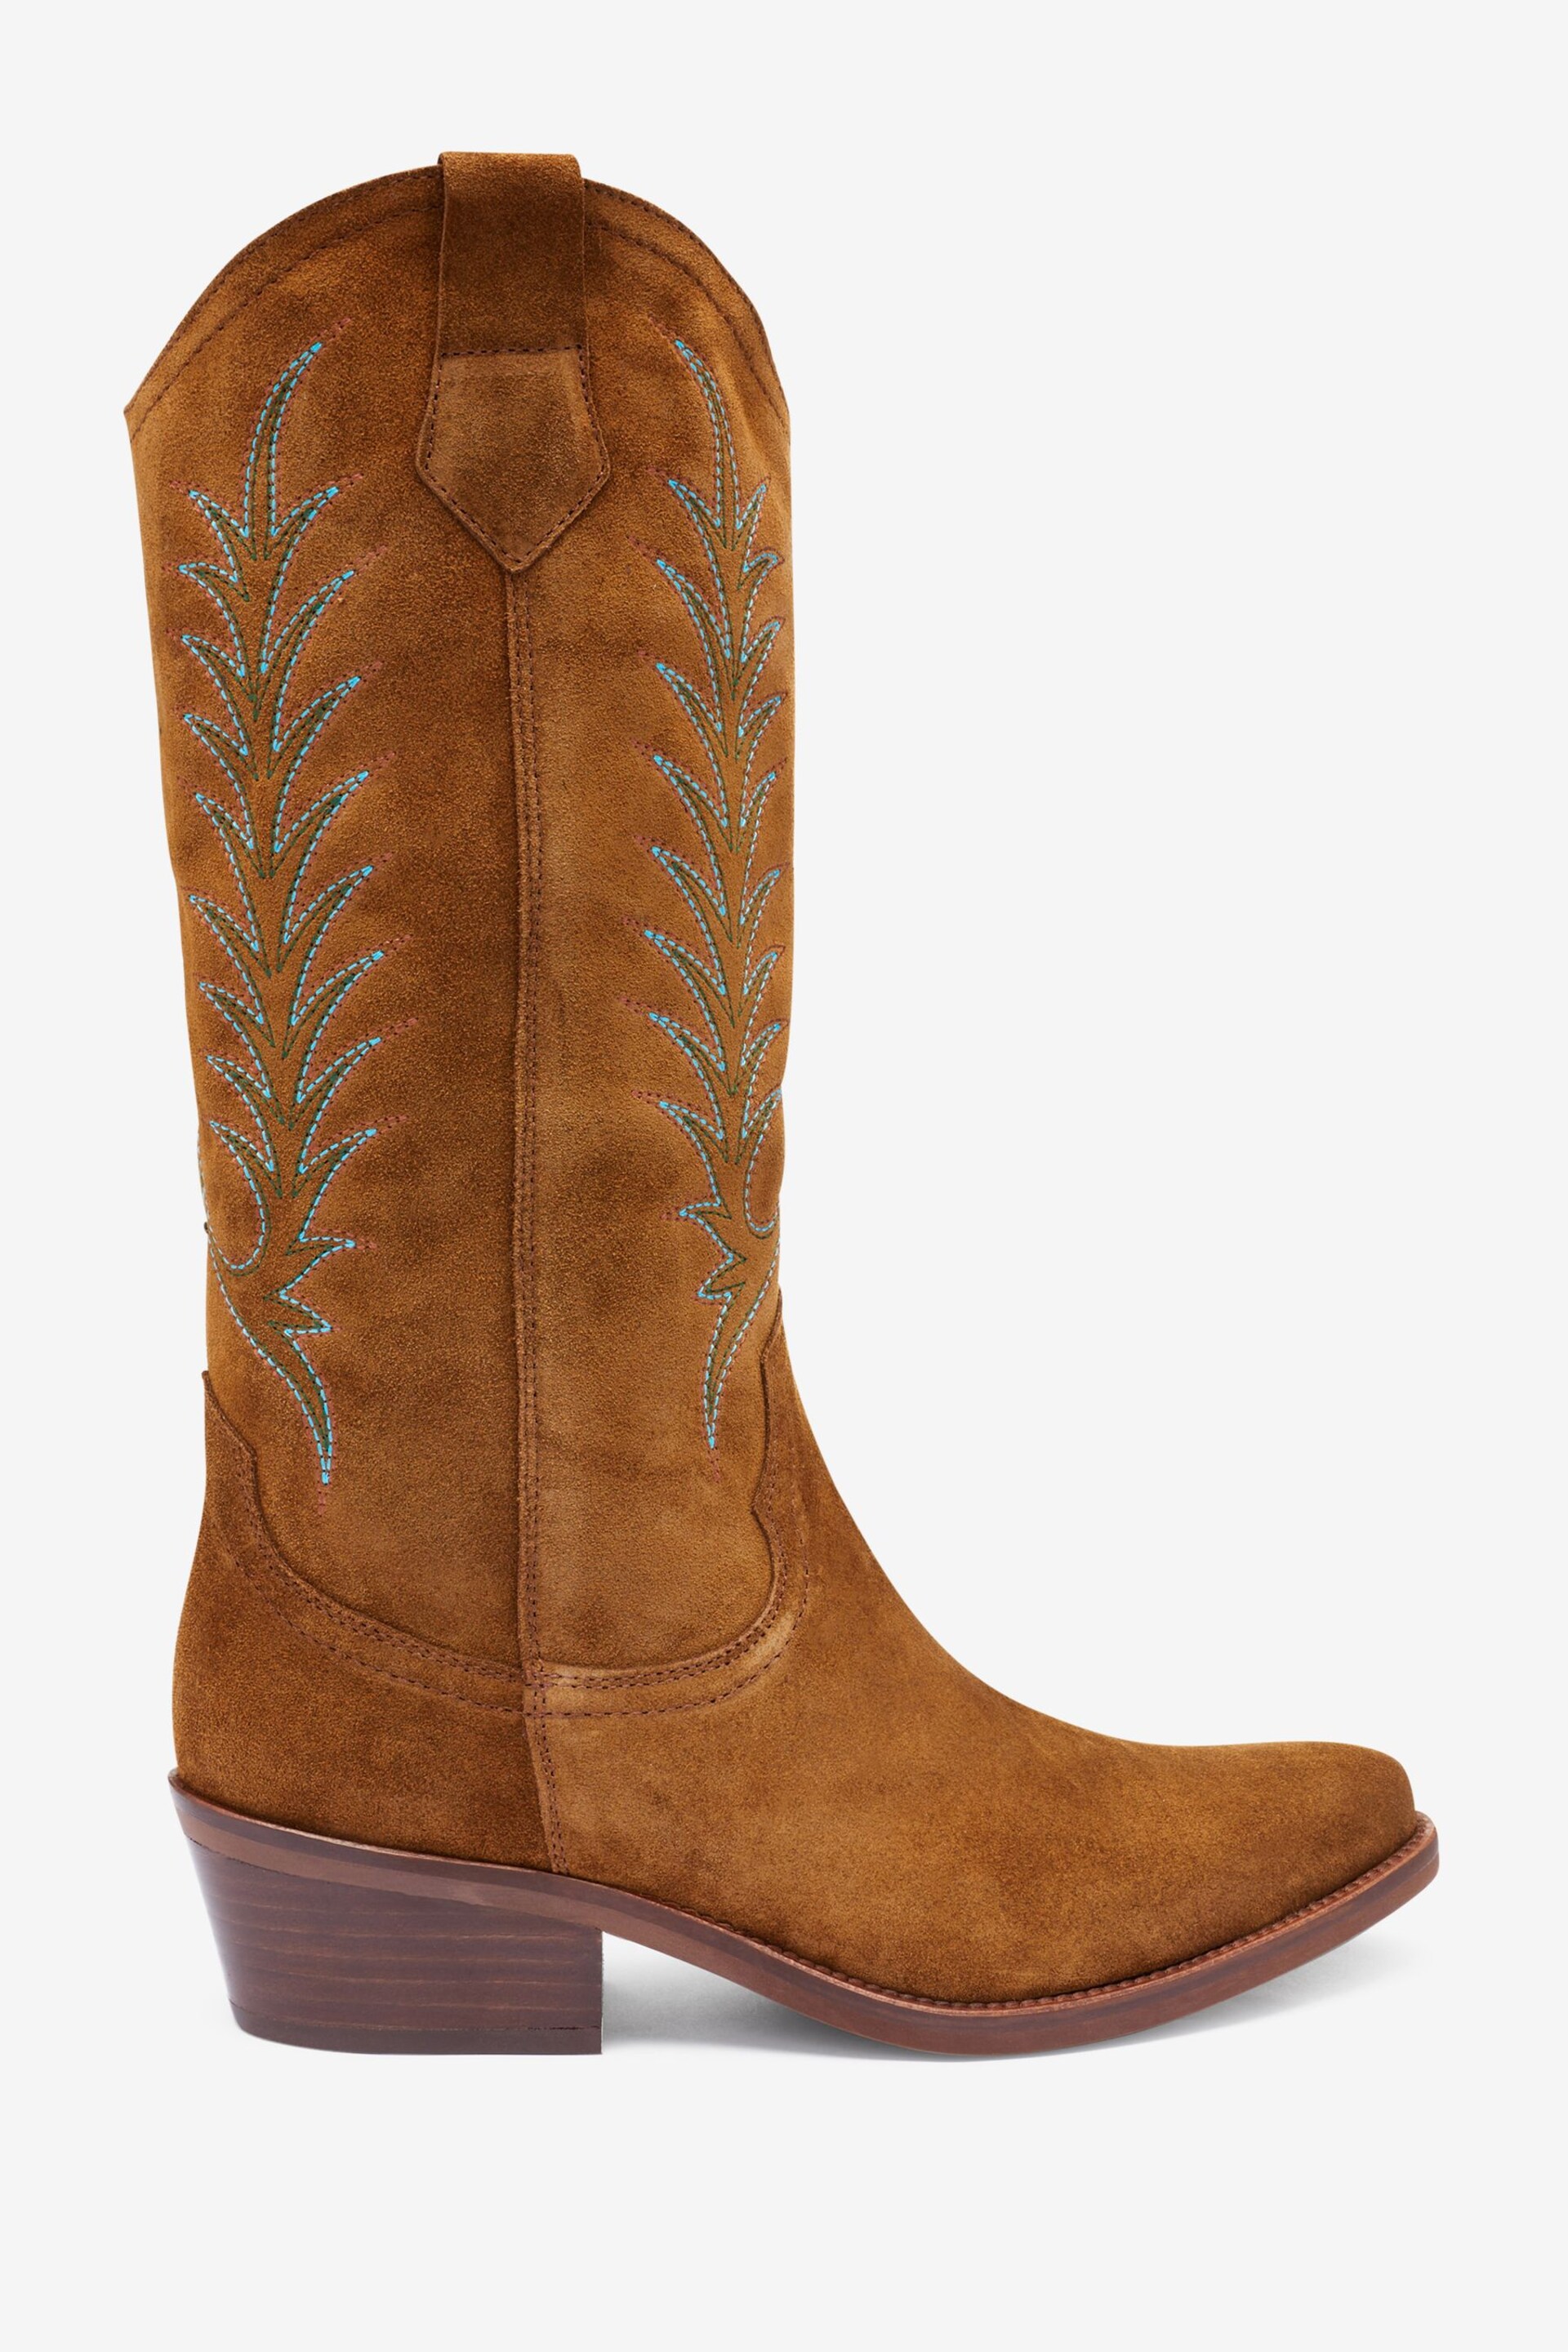 Penelope Chilvers Goldie Embroidered Cowboy Brown Boots - Image 9 of 16